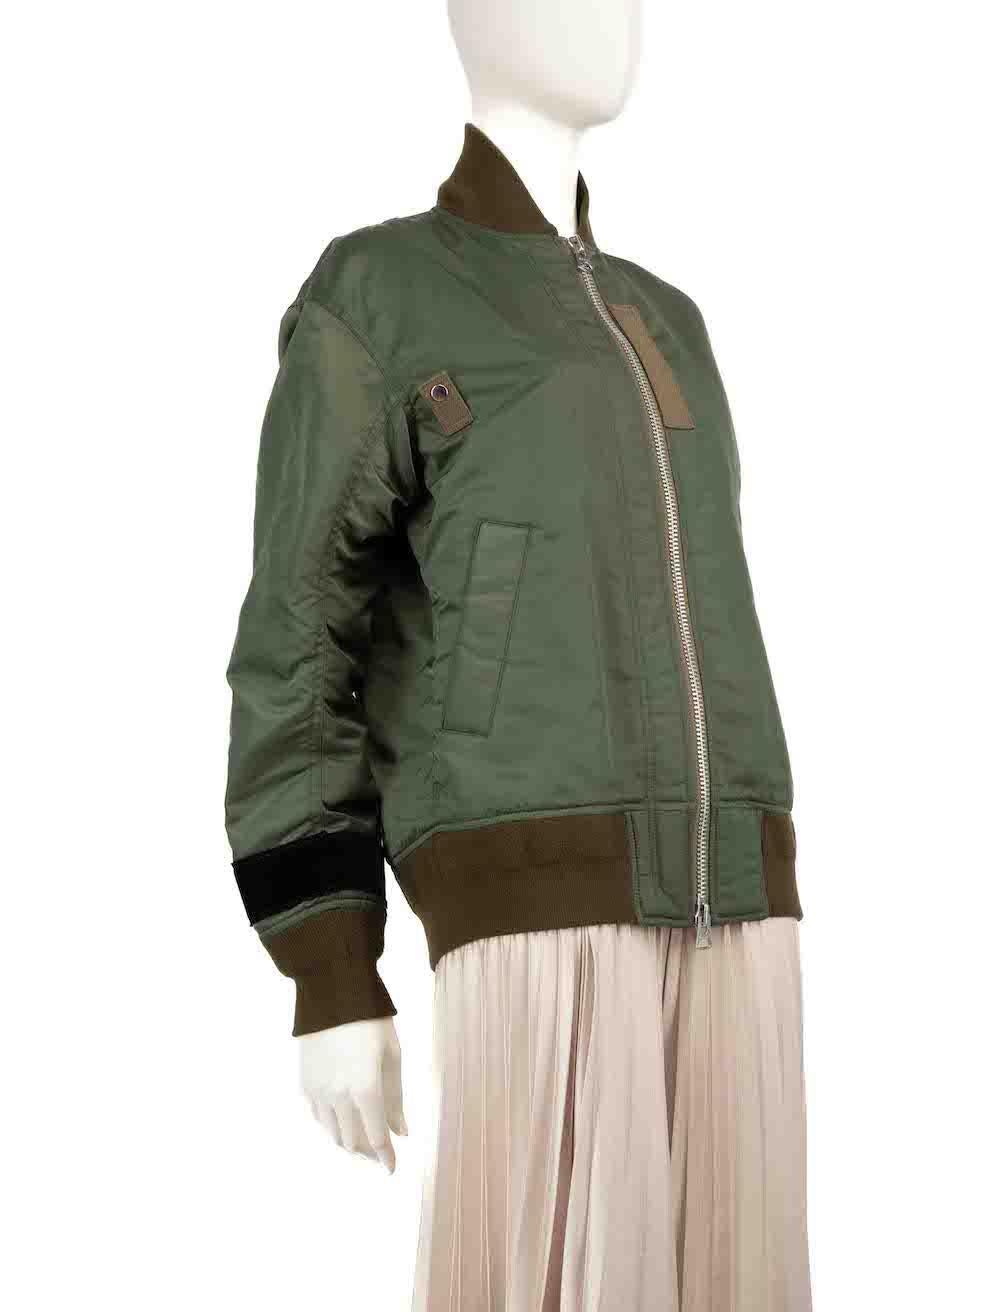 CONDITION is Very good. Minimal wear to bomber jacket is evident. Minimal wear to the front with some small water marks, light pilling to the bottom edge and some loose threads can be seen on the bottom left sleeve on this used Sacai designer resale